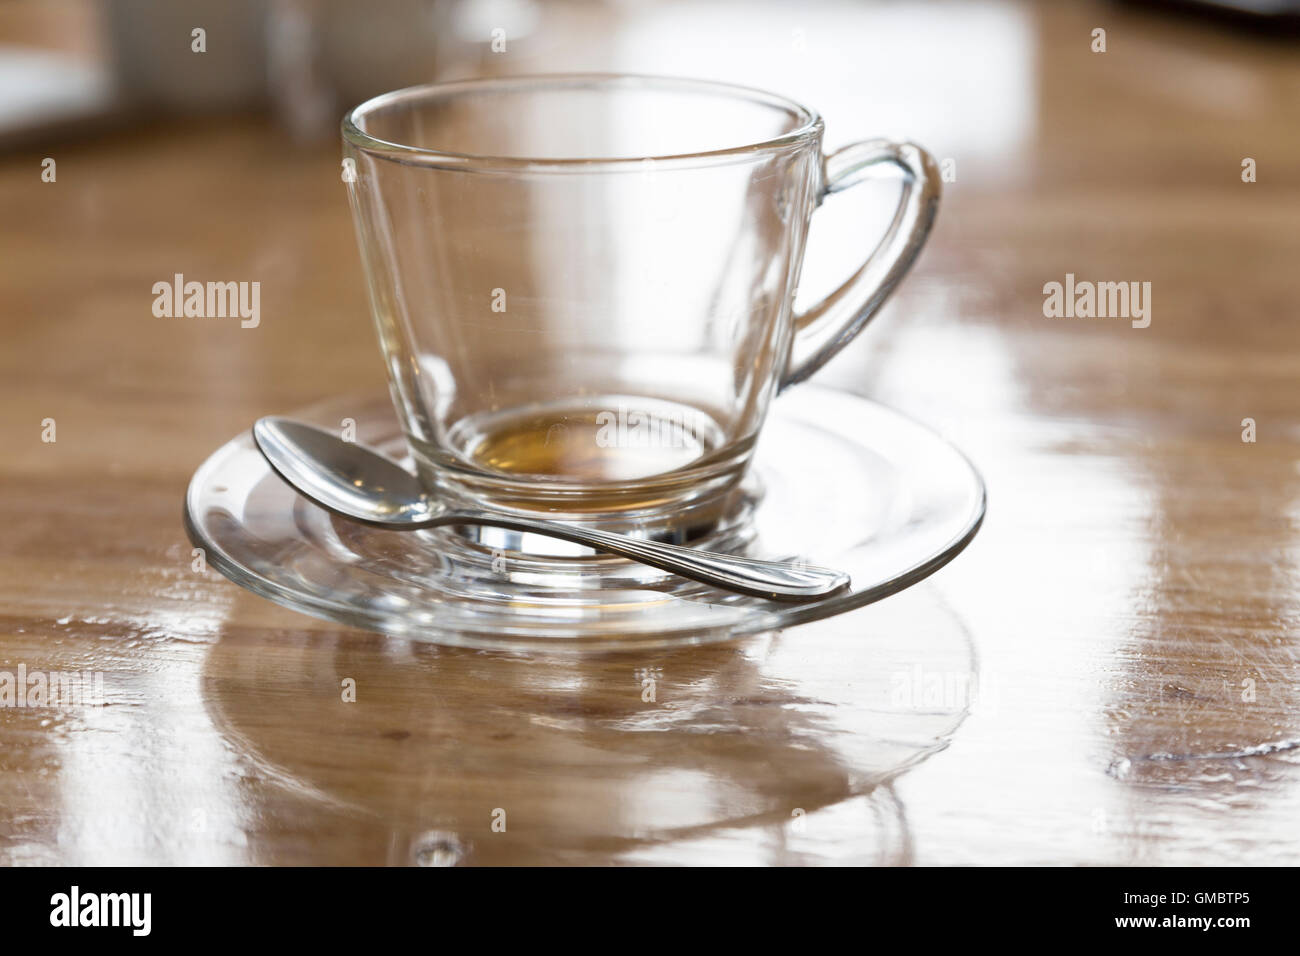 https://c8.alamy.com/comp/GMBTP5/empty-tea-cup-on-saucer-and-spoon-GMBTP5.jpg